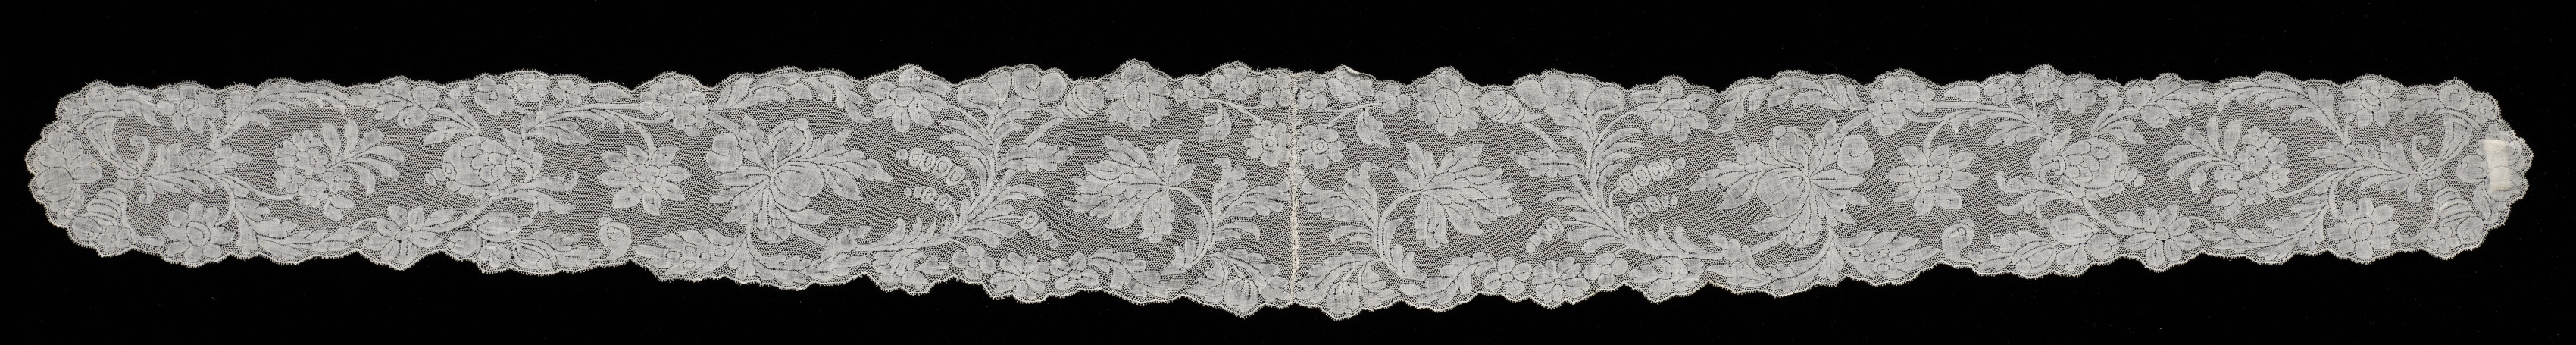 Pair of Bobbin Lace (Valenciennes) Lappets (joined)